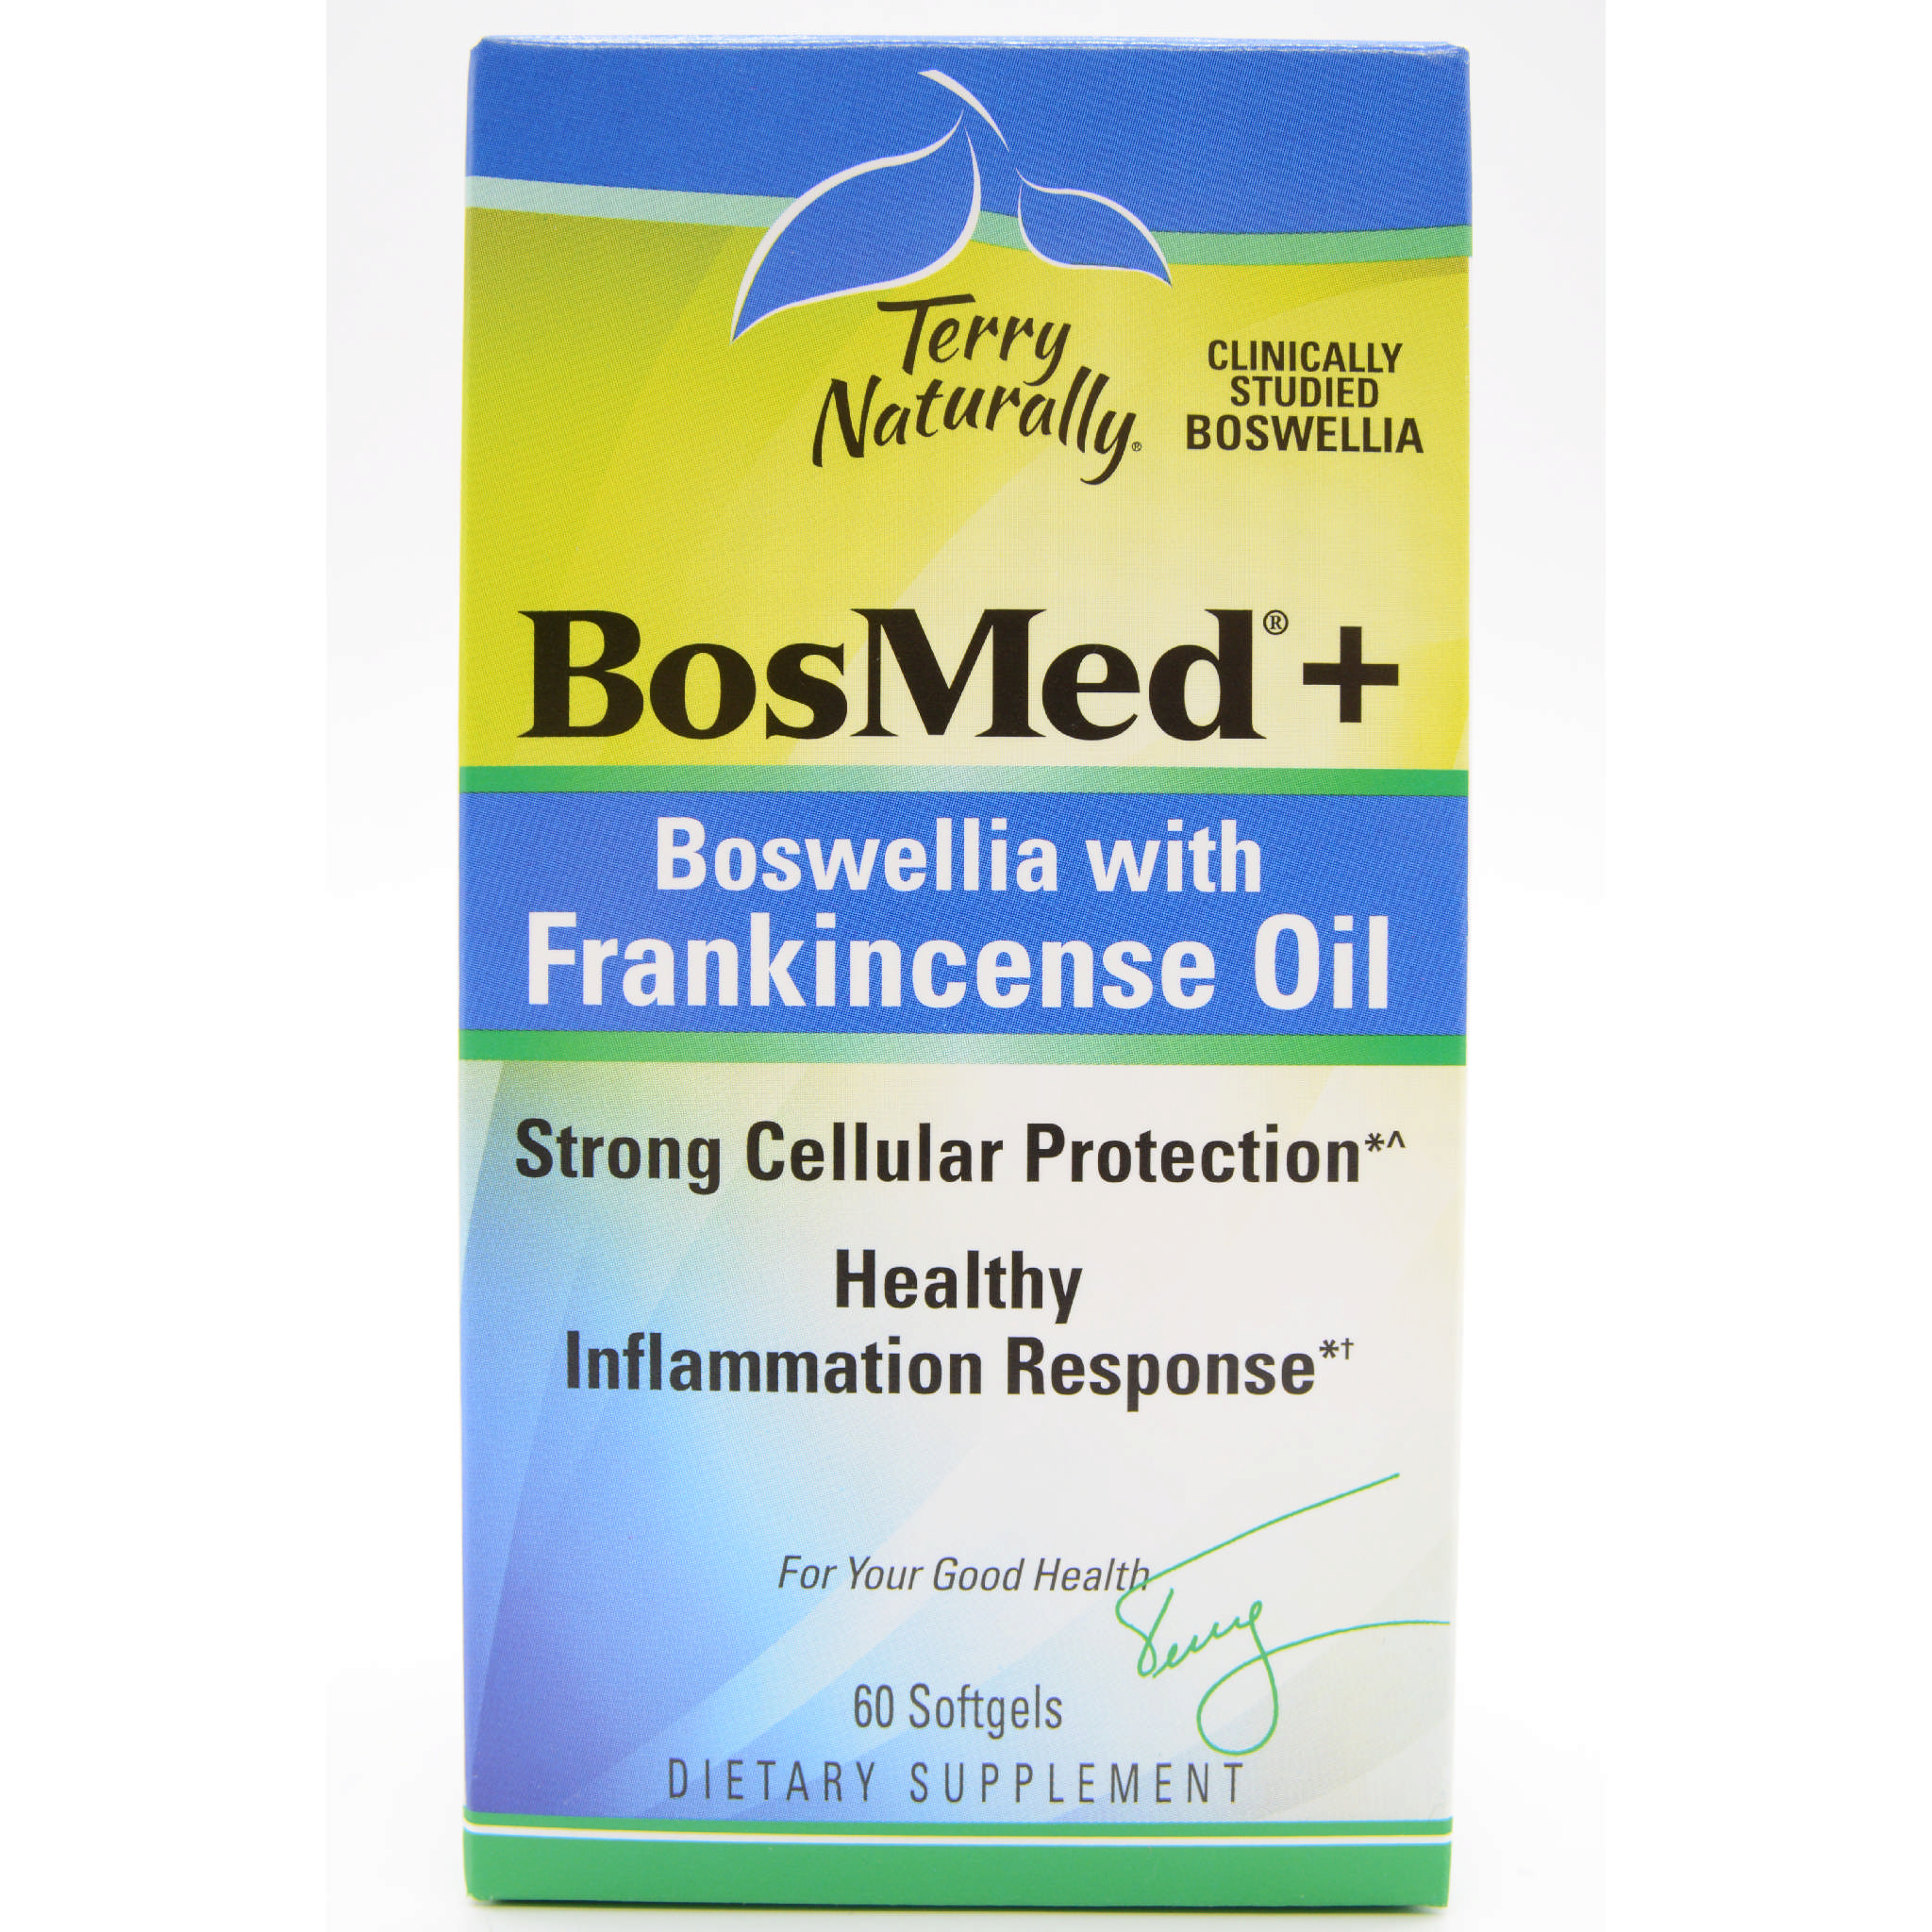 Terry Naturally - Bosmed + Boswellia & Frankince